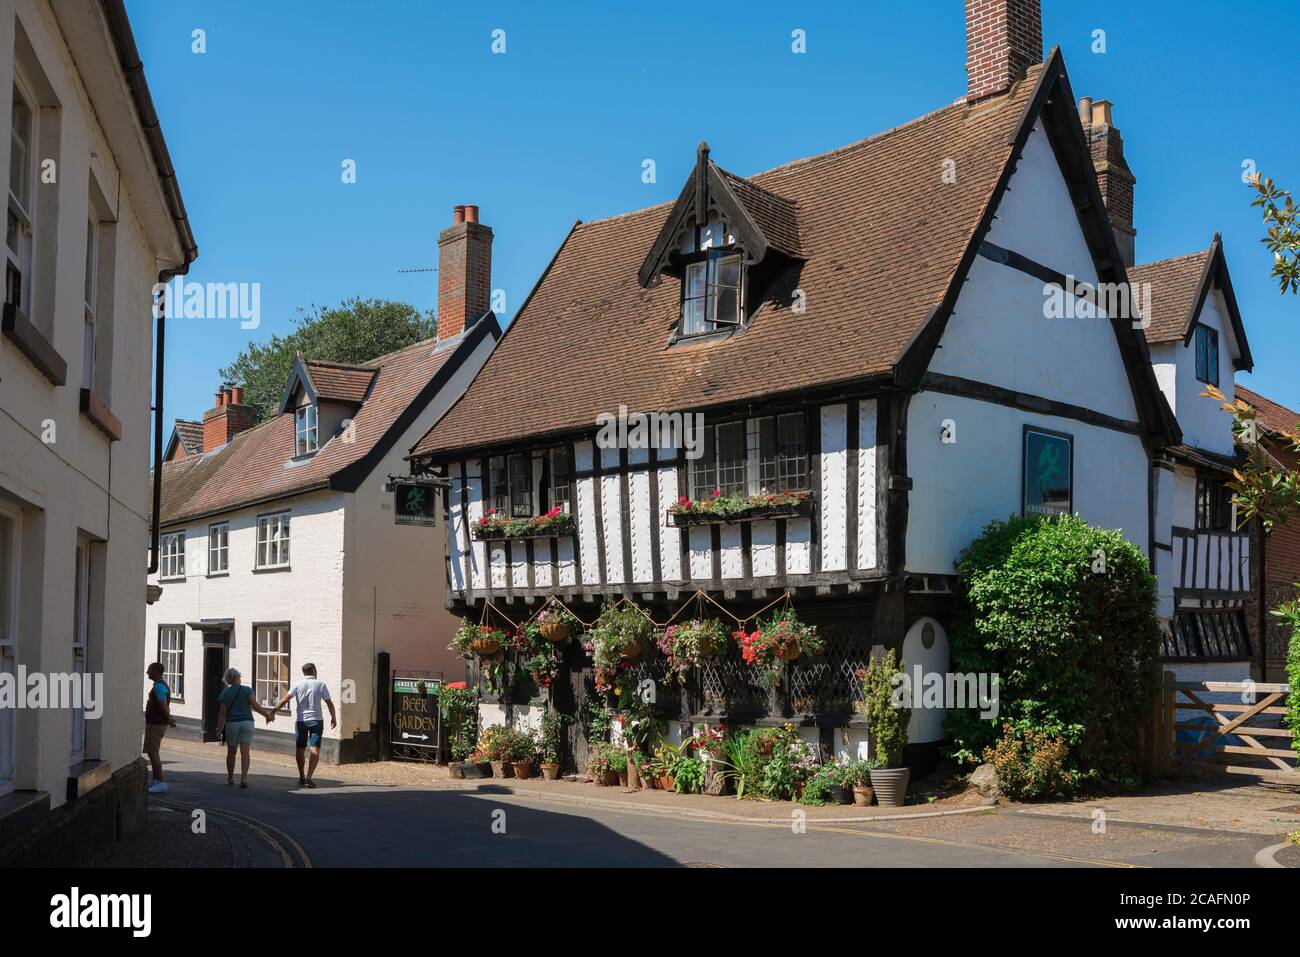 Traditional pub UK, view in summer of a half-timbered pub dating back to 1371 in the Norfolk market town of Wymondham, England, East Anglia, UK. Stock Photo